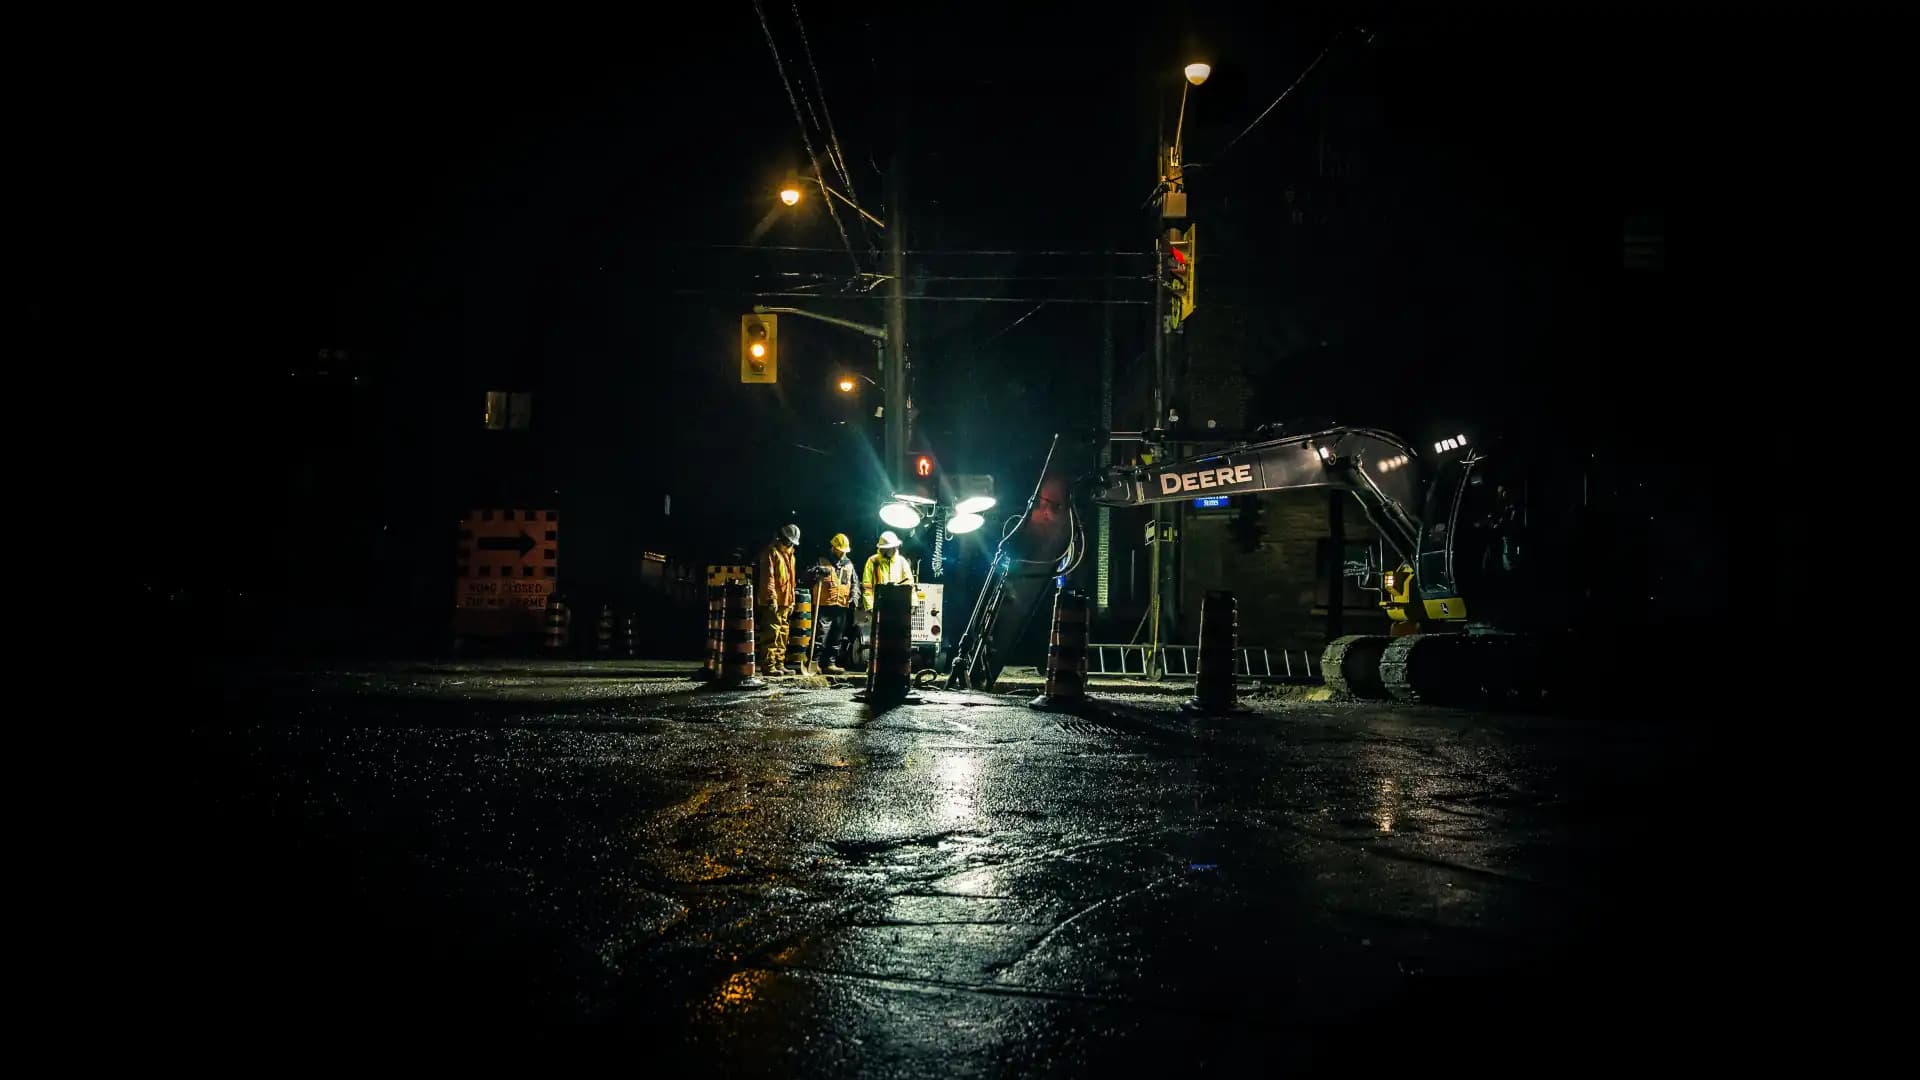 Night Road Works At An Intersection